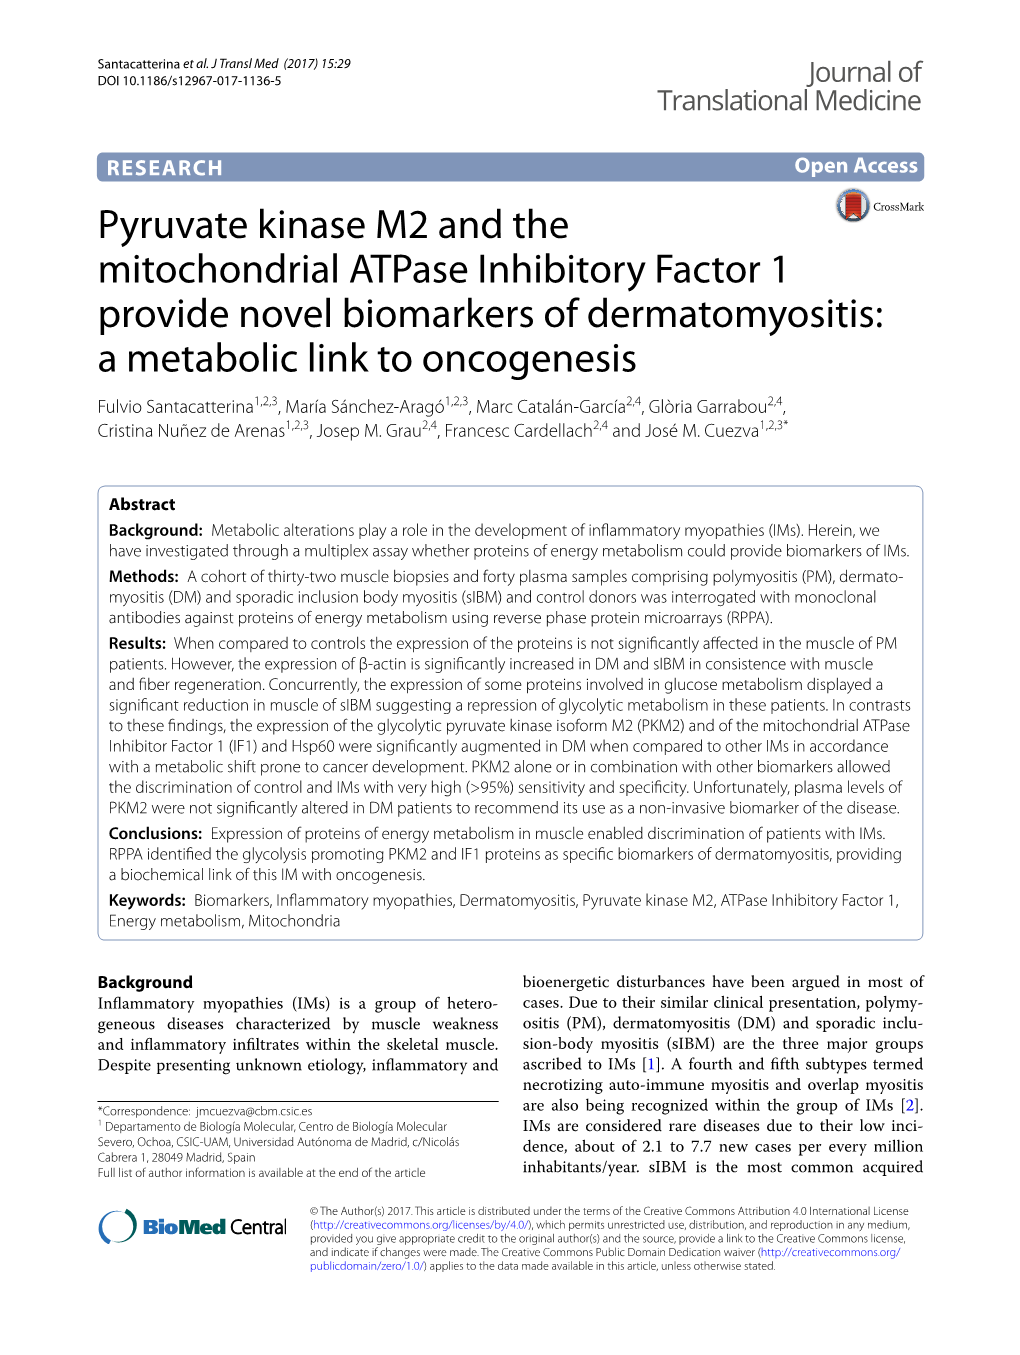 Pyruvate Kinase M2 and the Mitochondrial Atpase Inhibitory